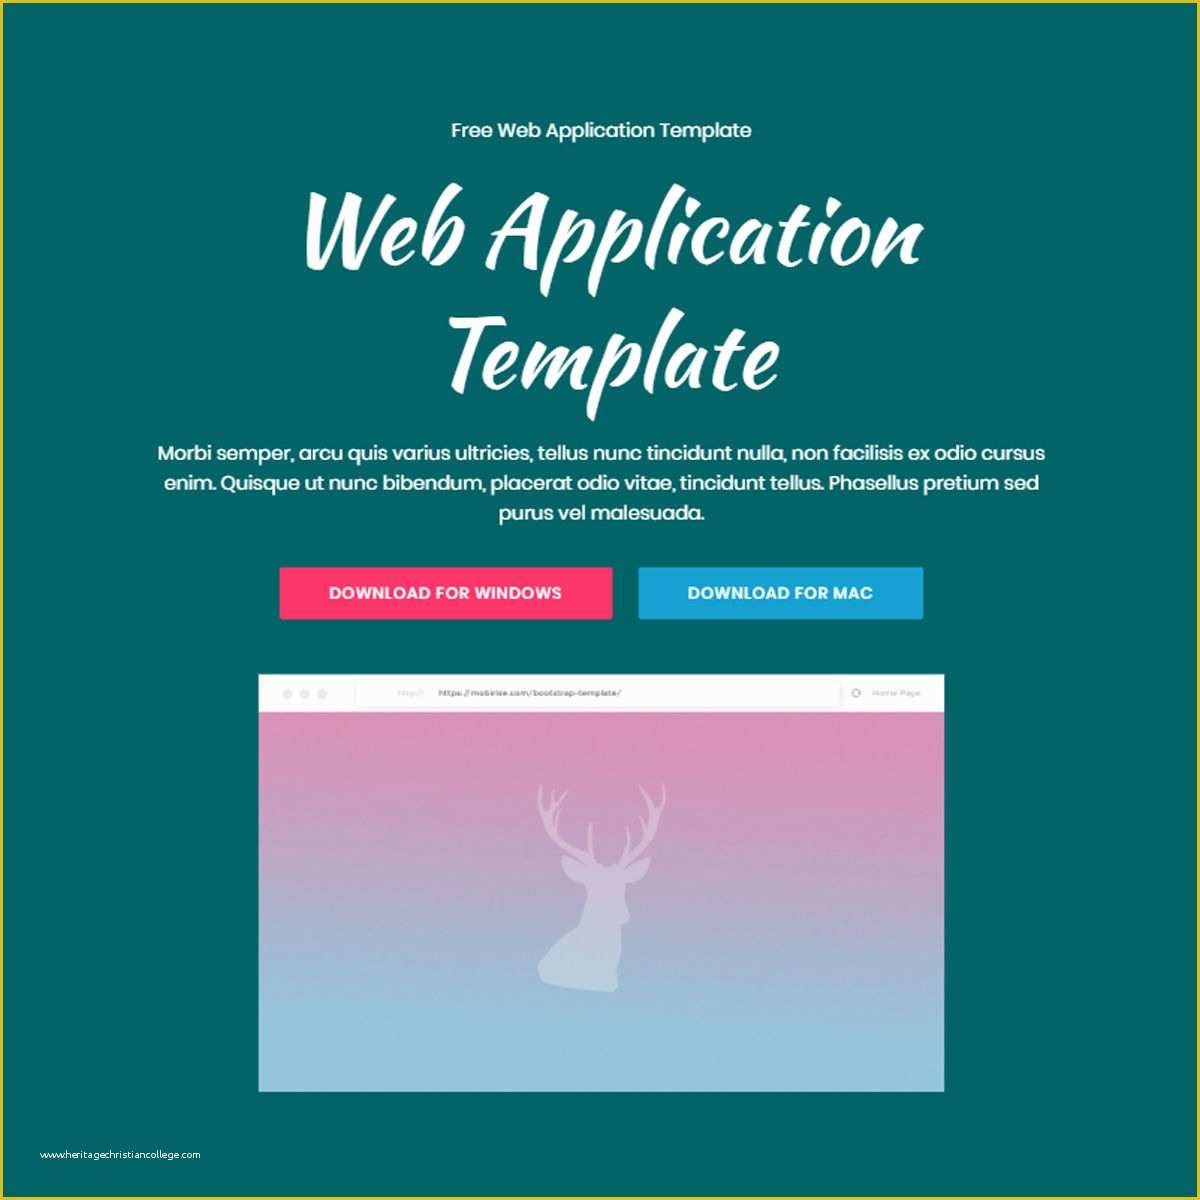 Html Web Application Templates Free Download Of Free Bootstrap 4 Template 2019